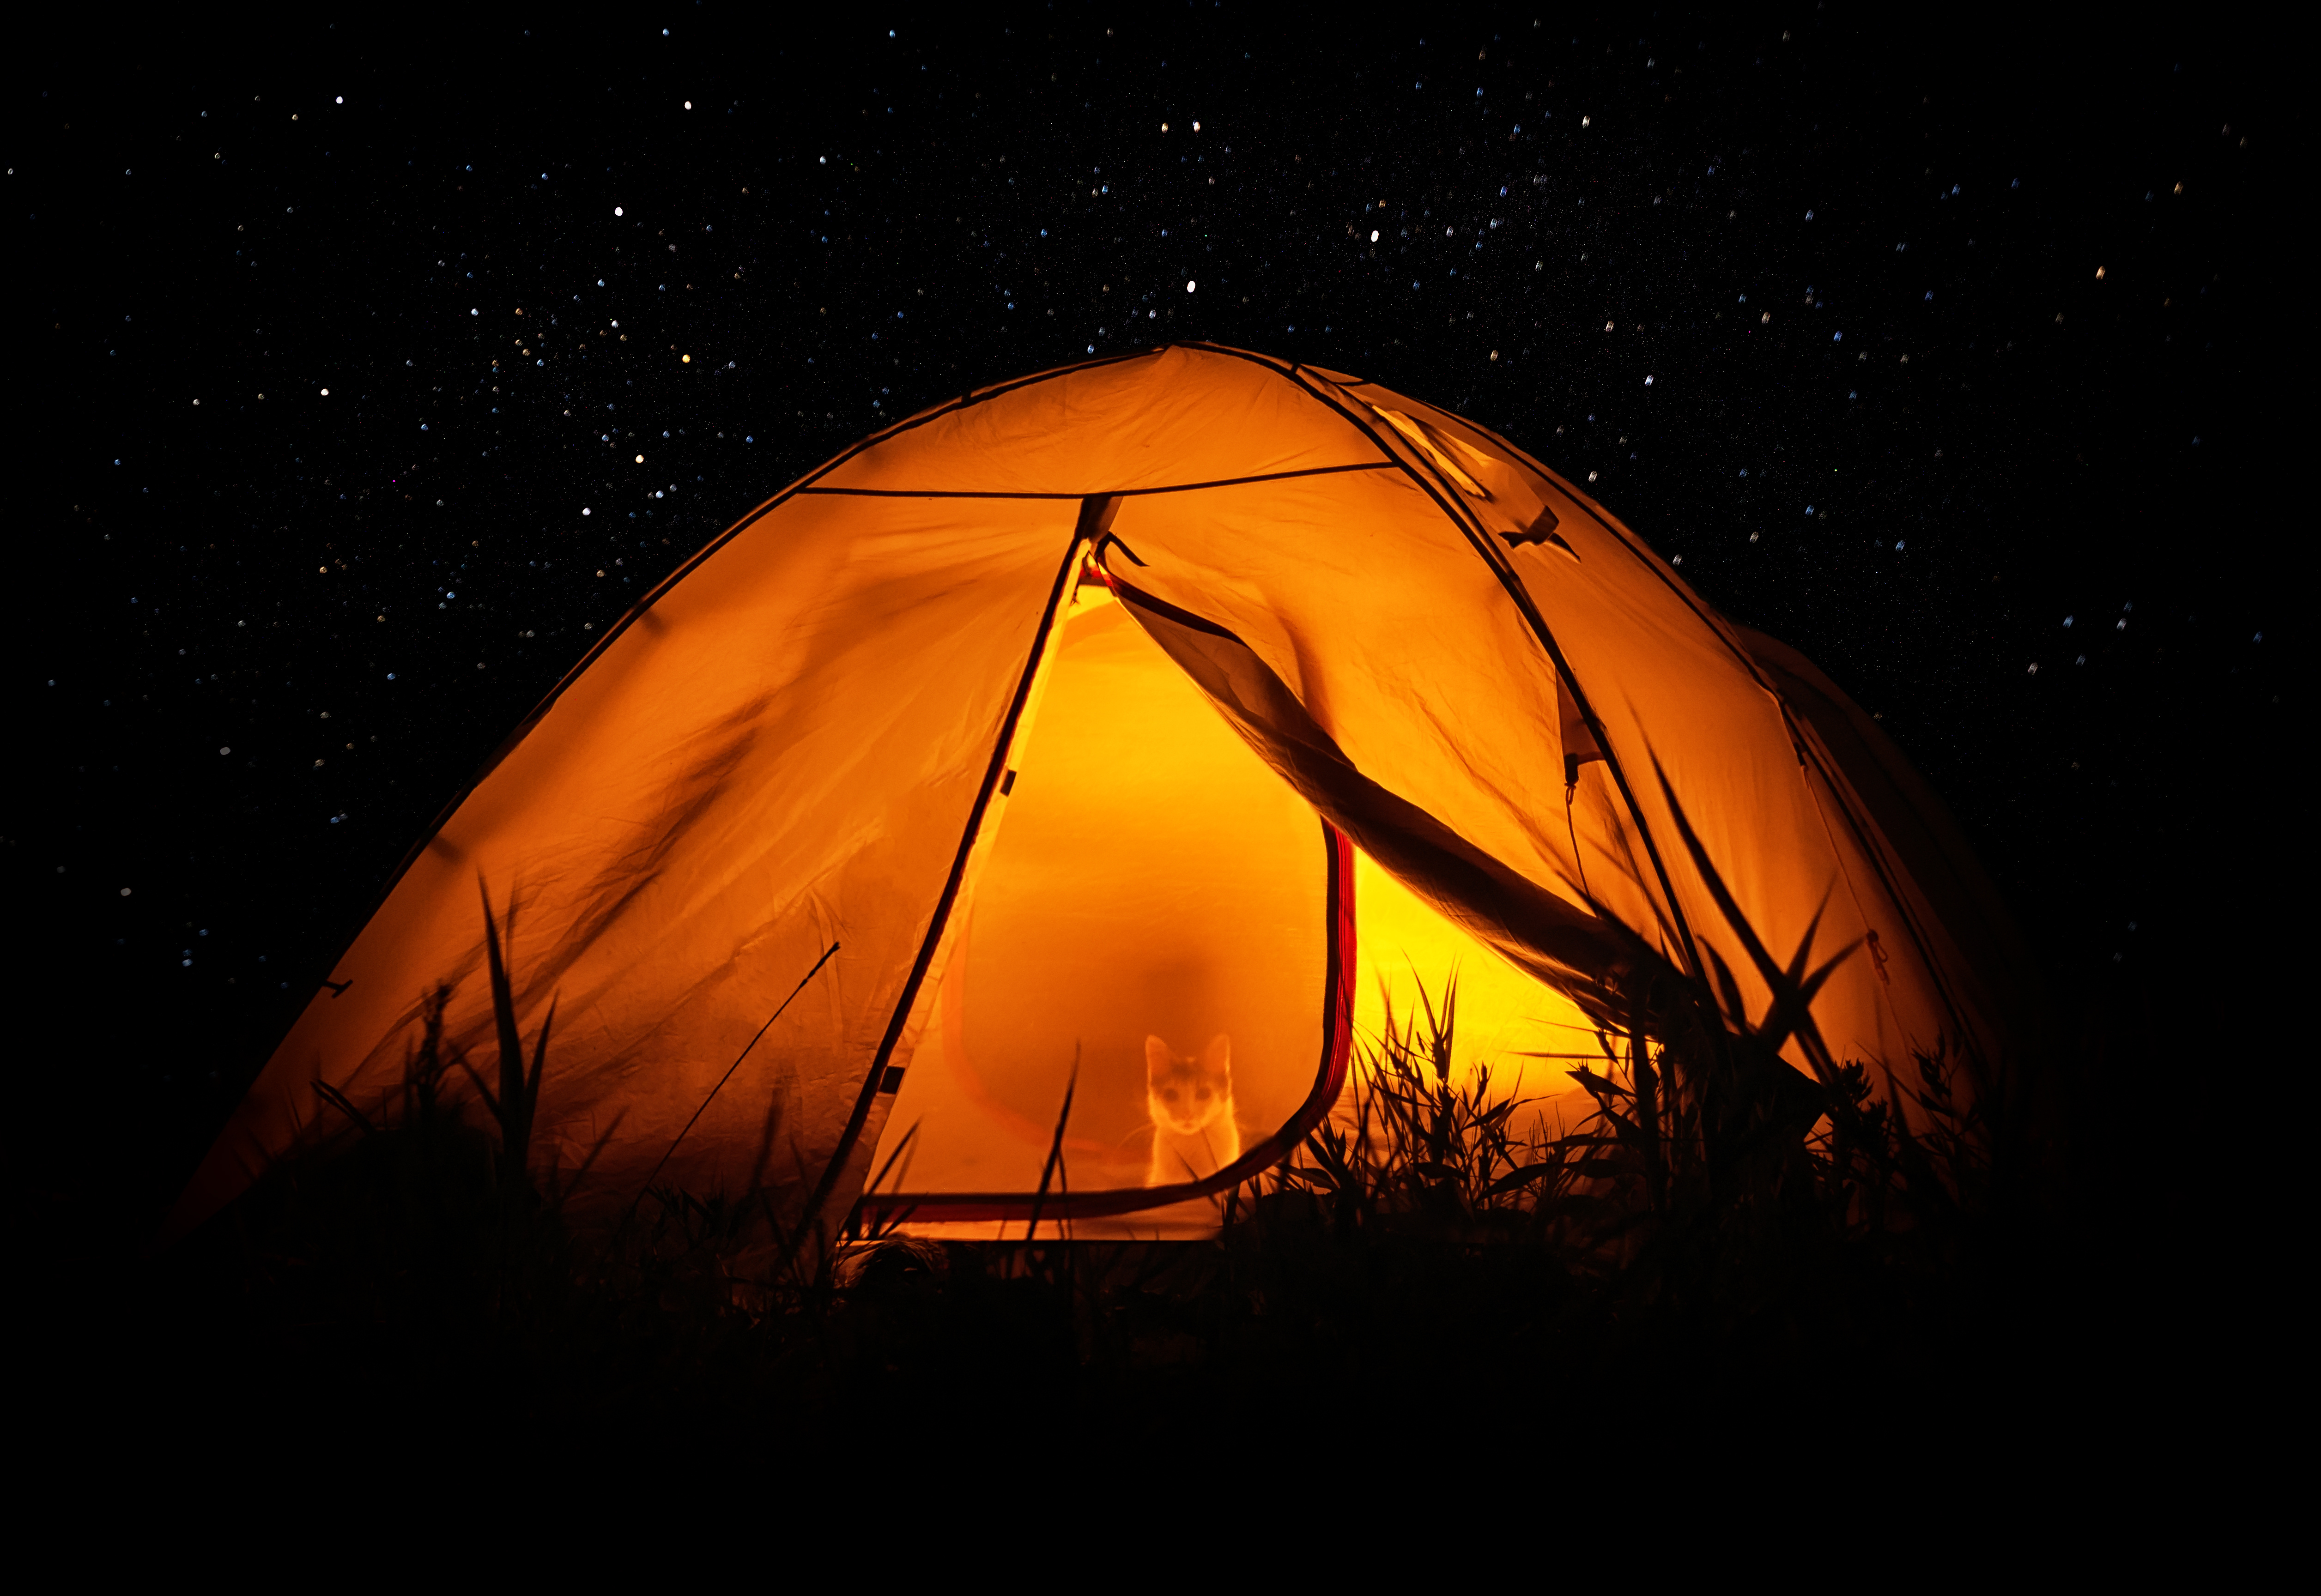 https://www.bestreviewguide.com/images/article/Camping%20lantern%20guide%20-%20What%20to%20look%20for.jpeg